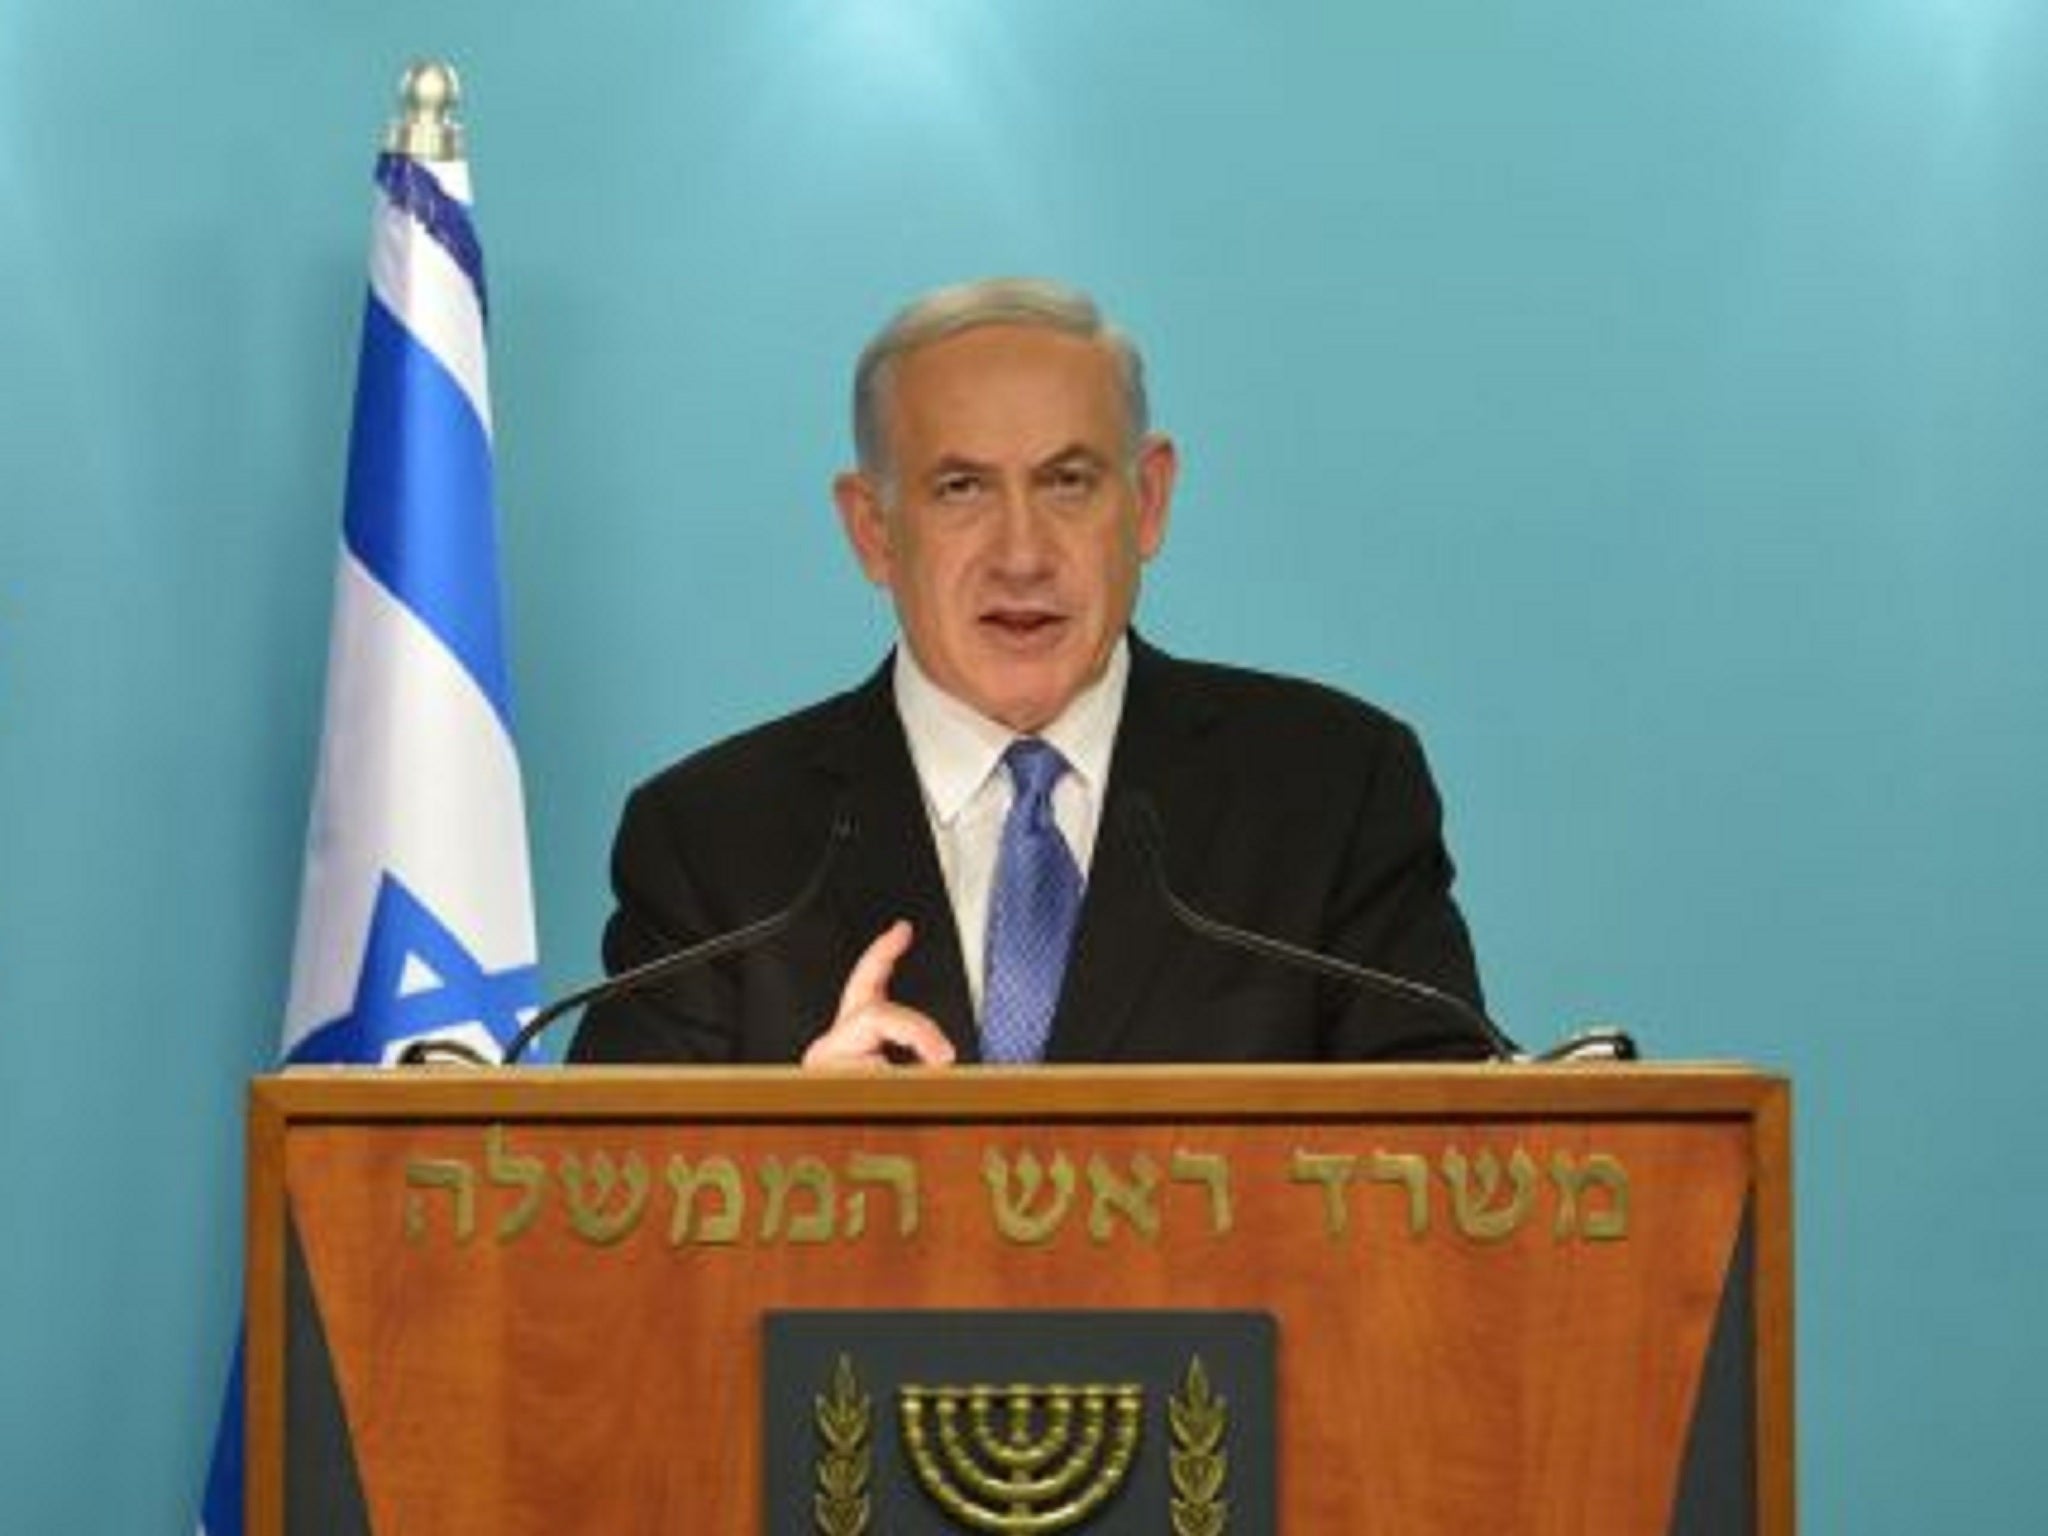 Benjamin Netanyahu making his speech today after the announcement by Barack Obama of the almost-confirmed deal